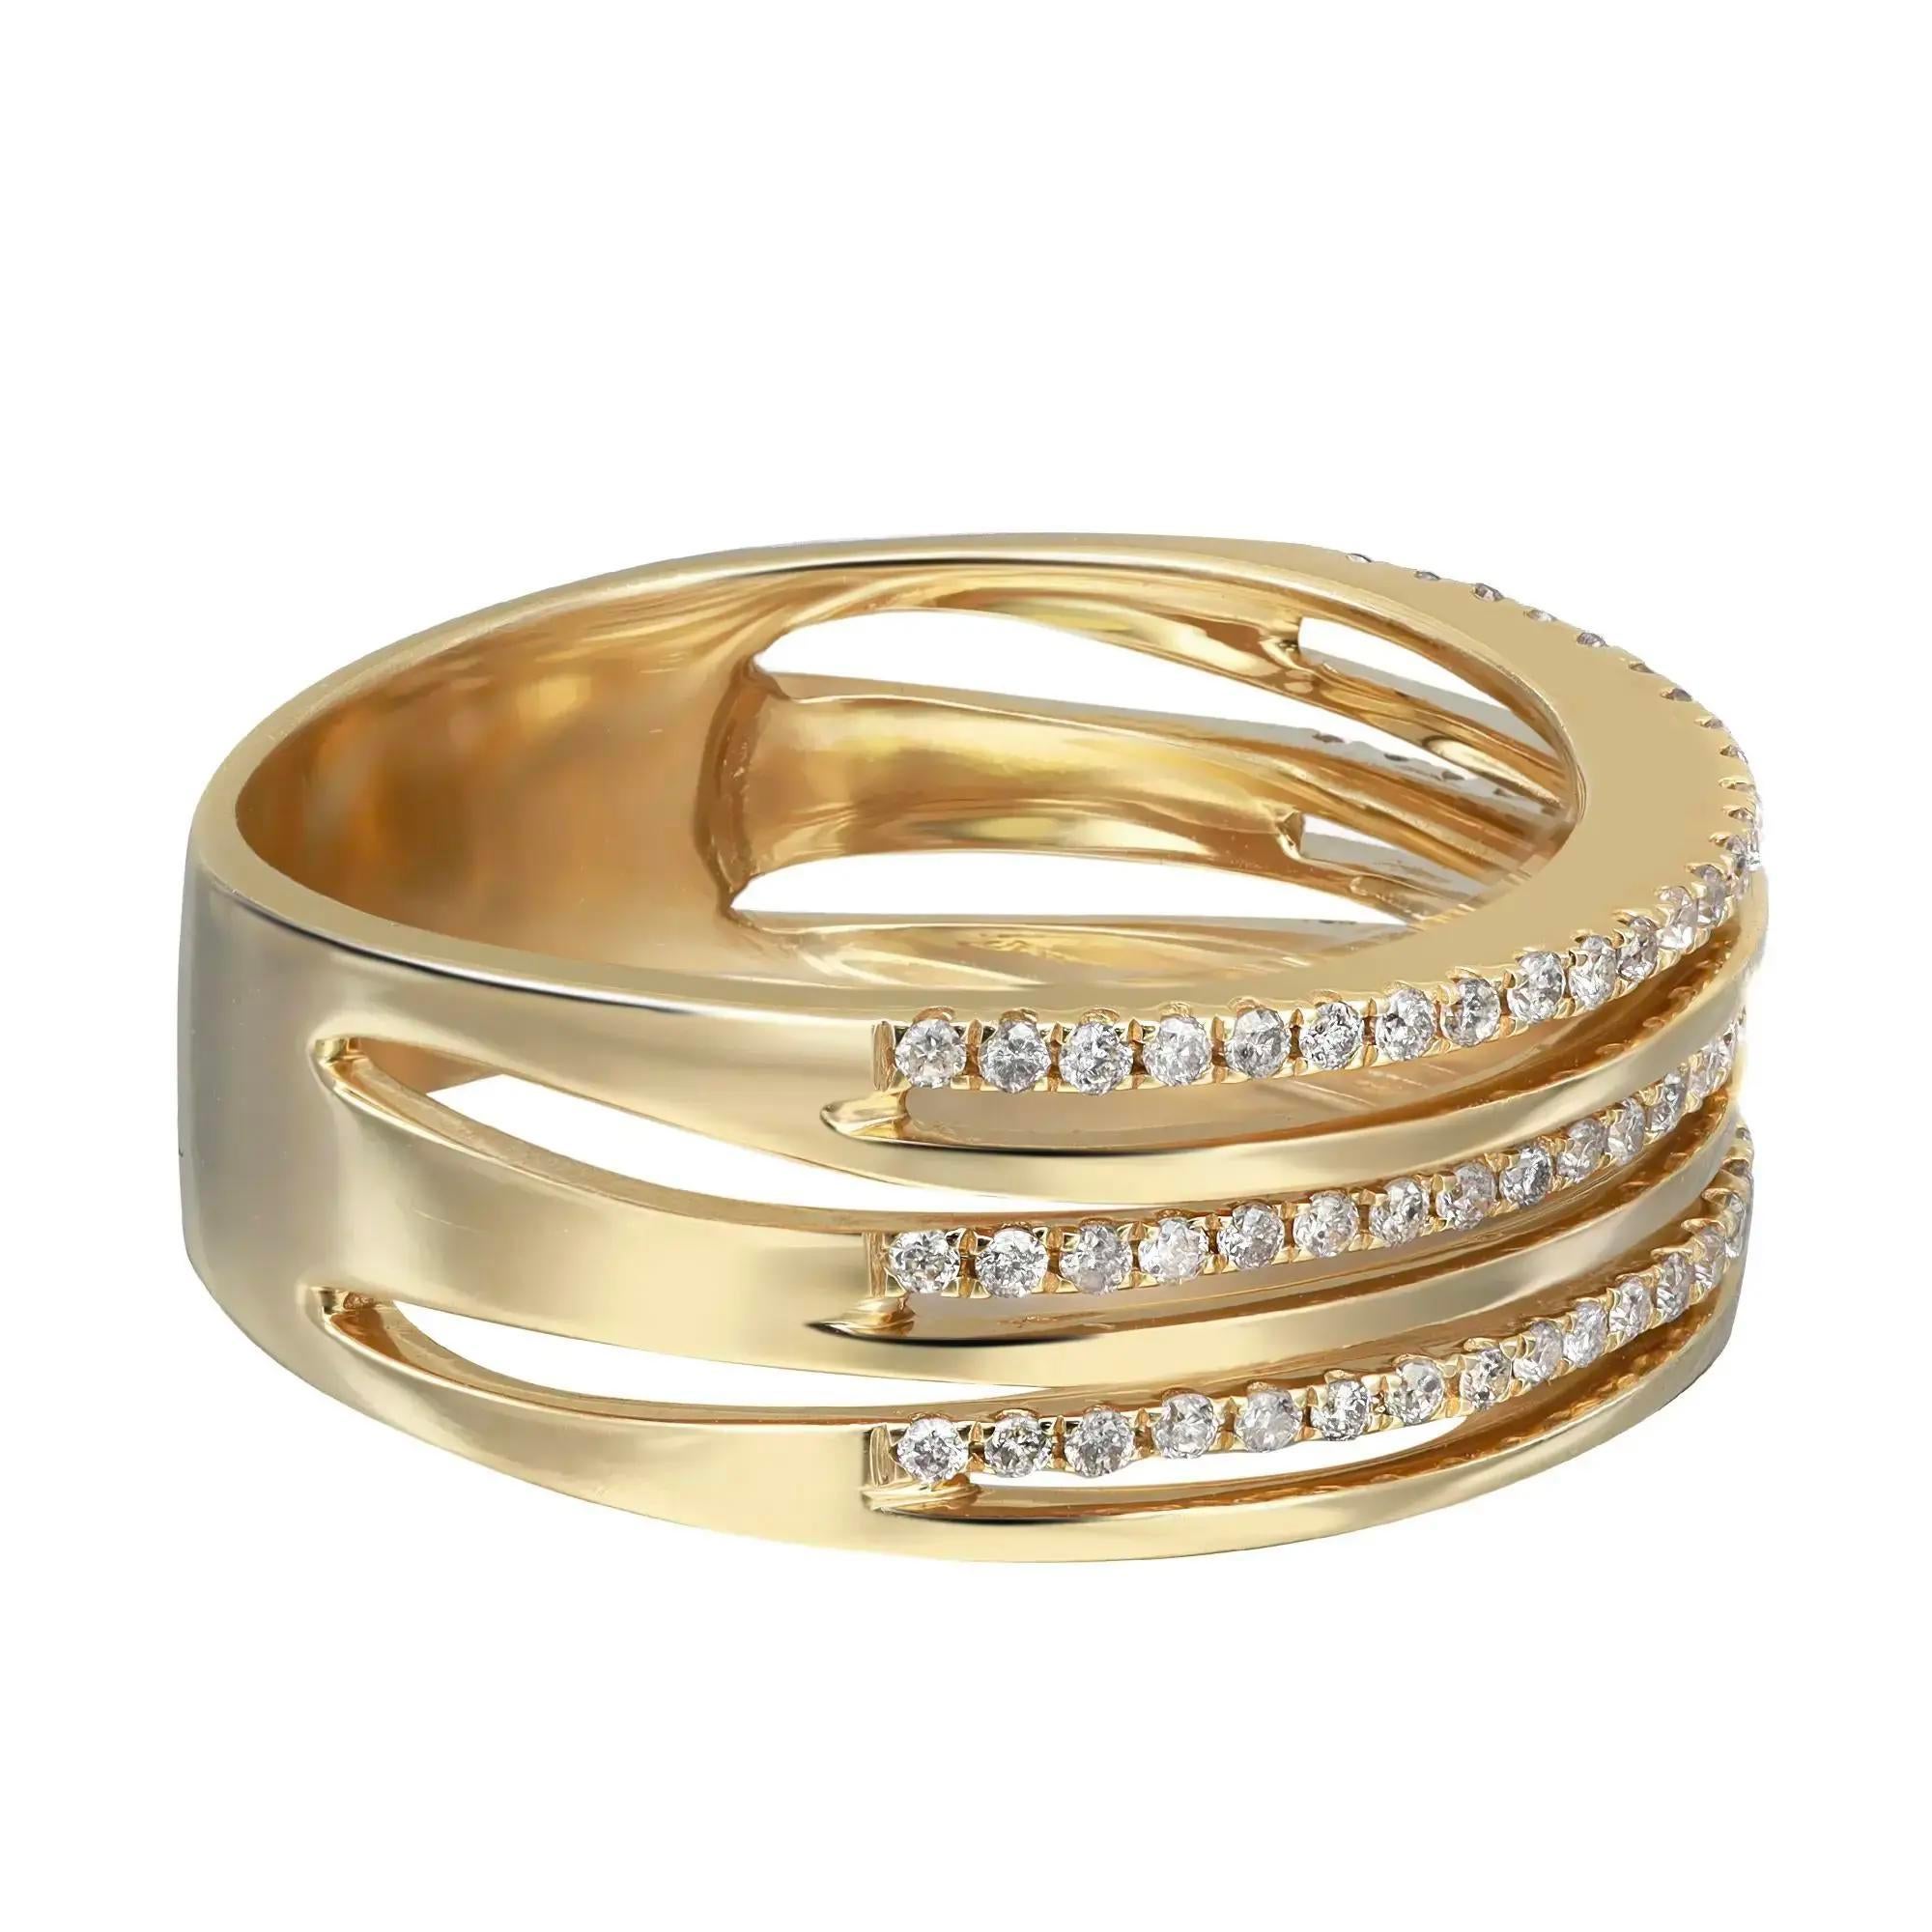 Stunning and elegant diamond wide band ring. This ring features prong set tiny round brilliant cut diamonds in alternating multi rows. Crafted in high polished 14K yellow gold. Total diamond weight: 0.31 carat with color I and SI1 clarity. Ring